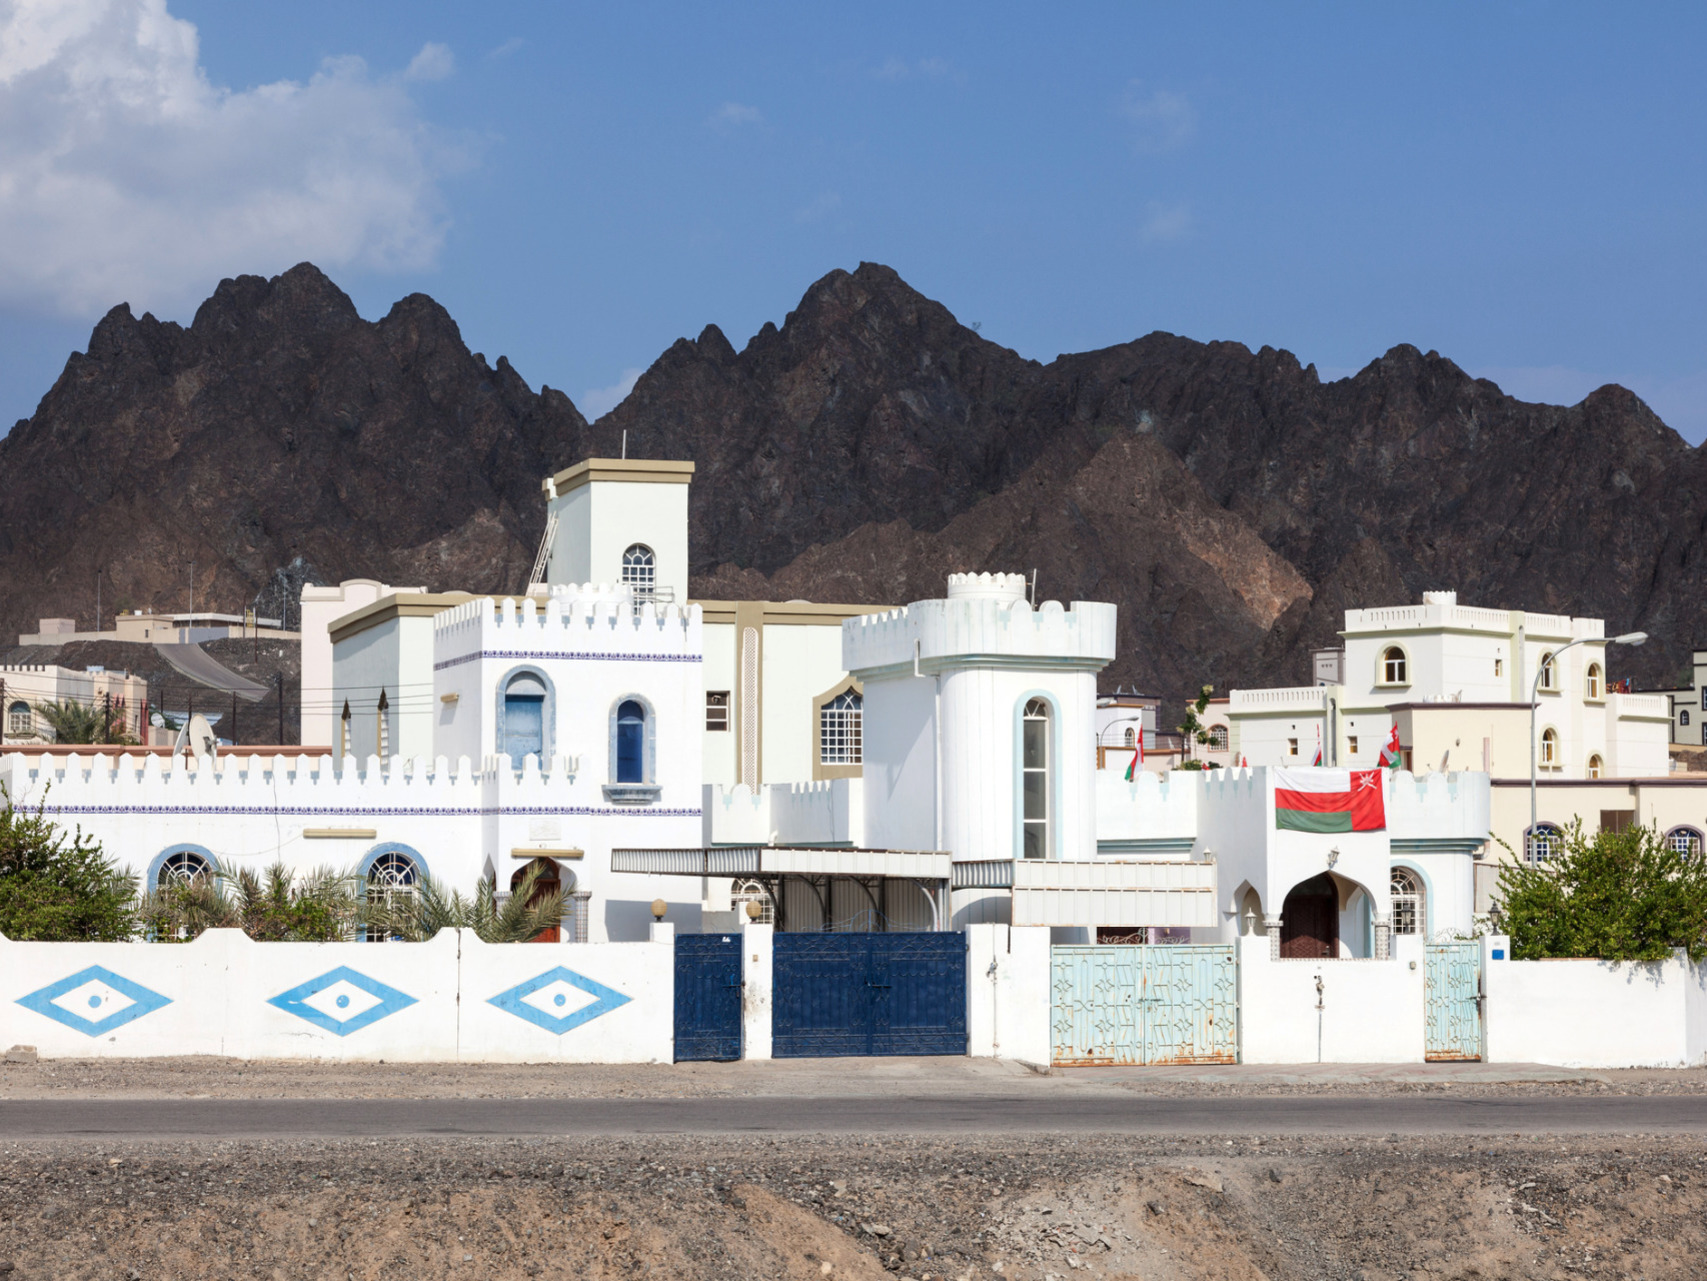 Residential area of Muscat, Oman